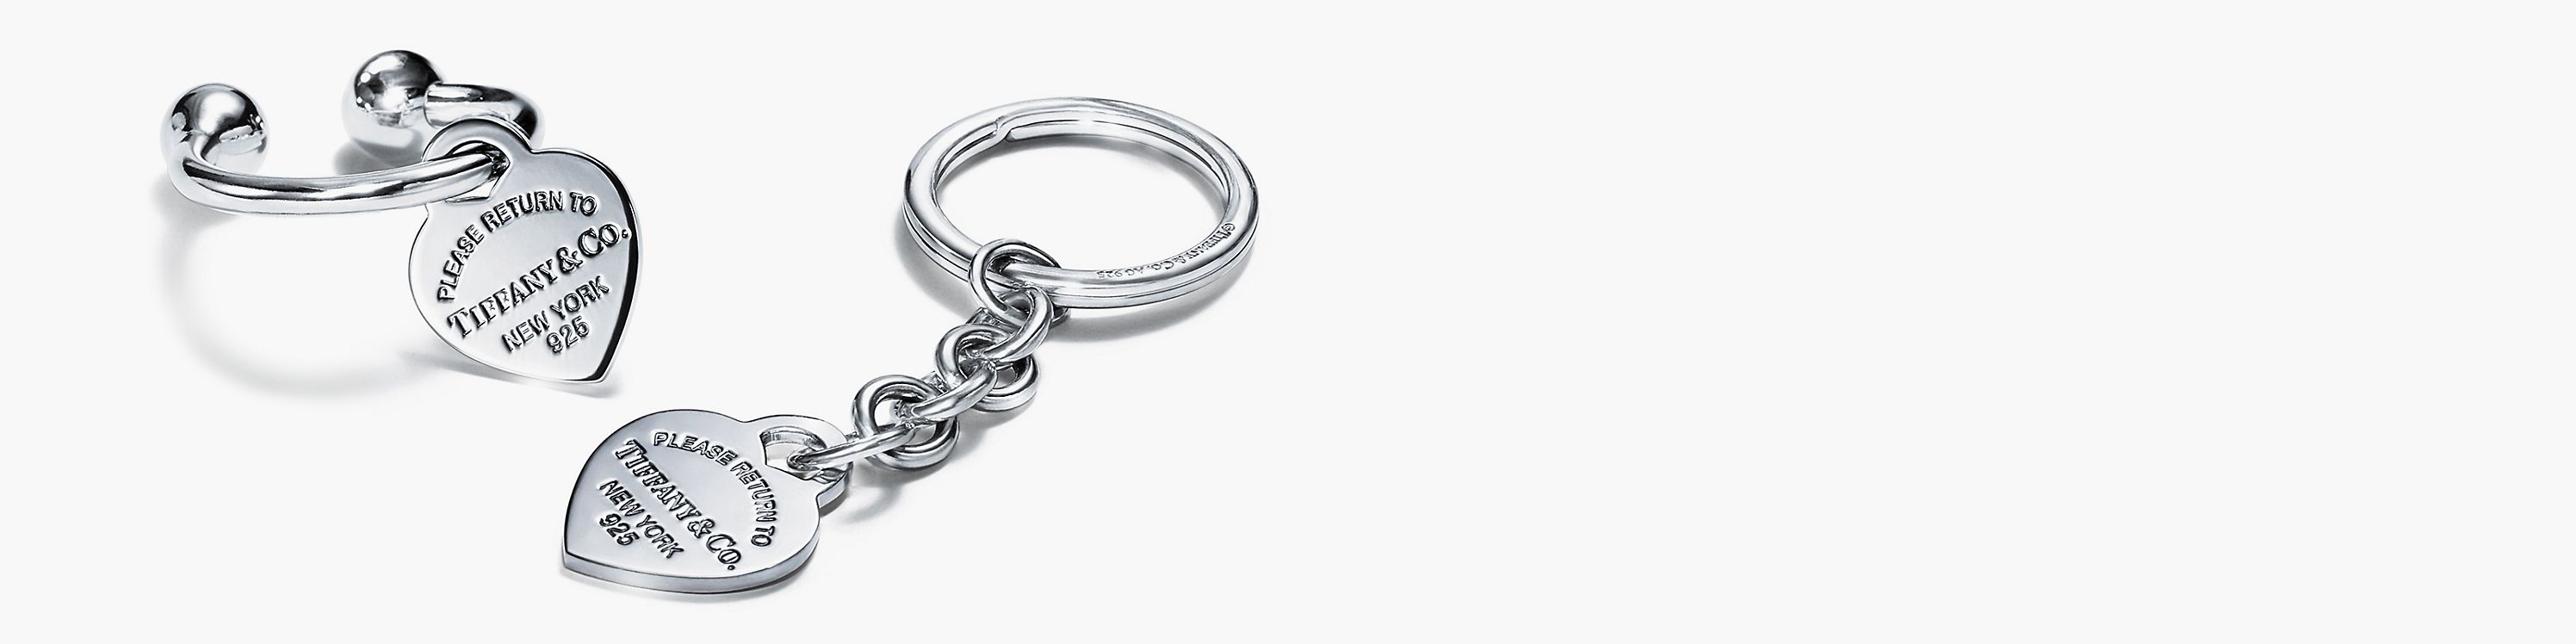 Accessoires Sleutelhangers & Keycords Sleutelhangers Tiffany Picasso 925 Silver Sphere Ball Twisted Cable Coil Key Chain Ring Authentic Tiffany & Co Paloma Picasso Sterling Silver Keychain 